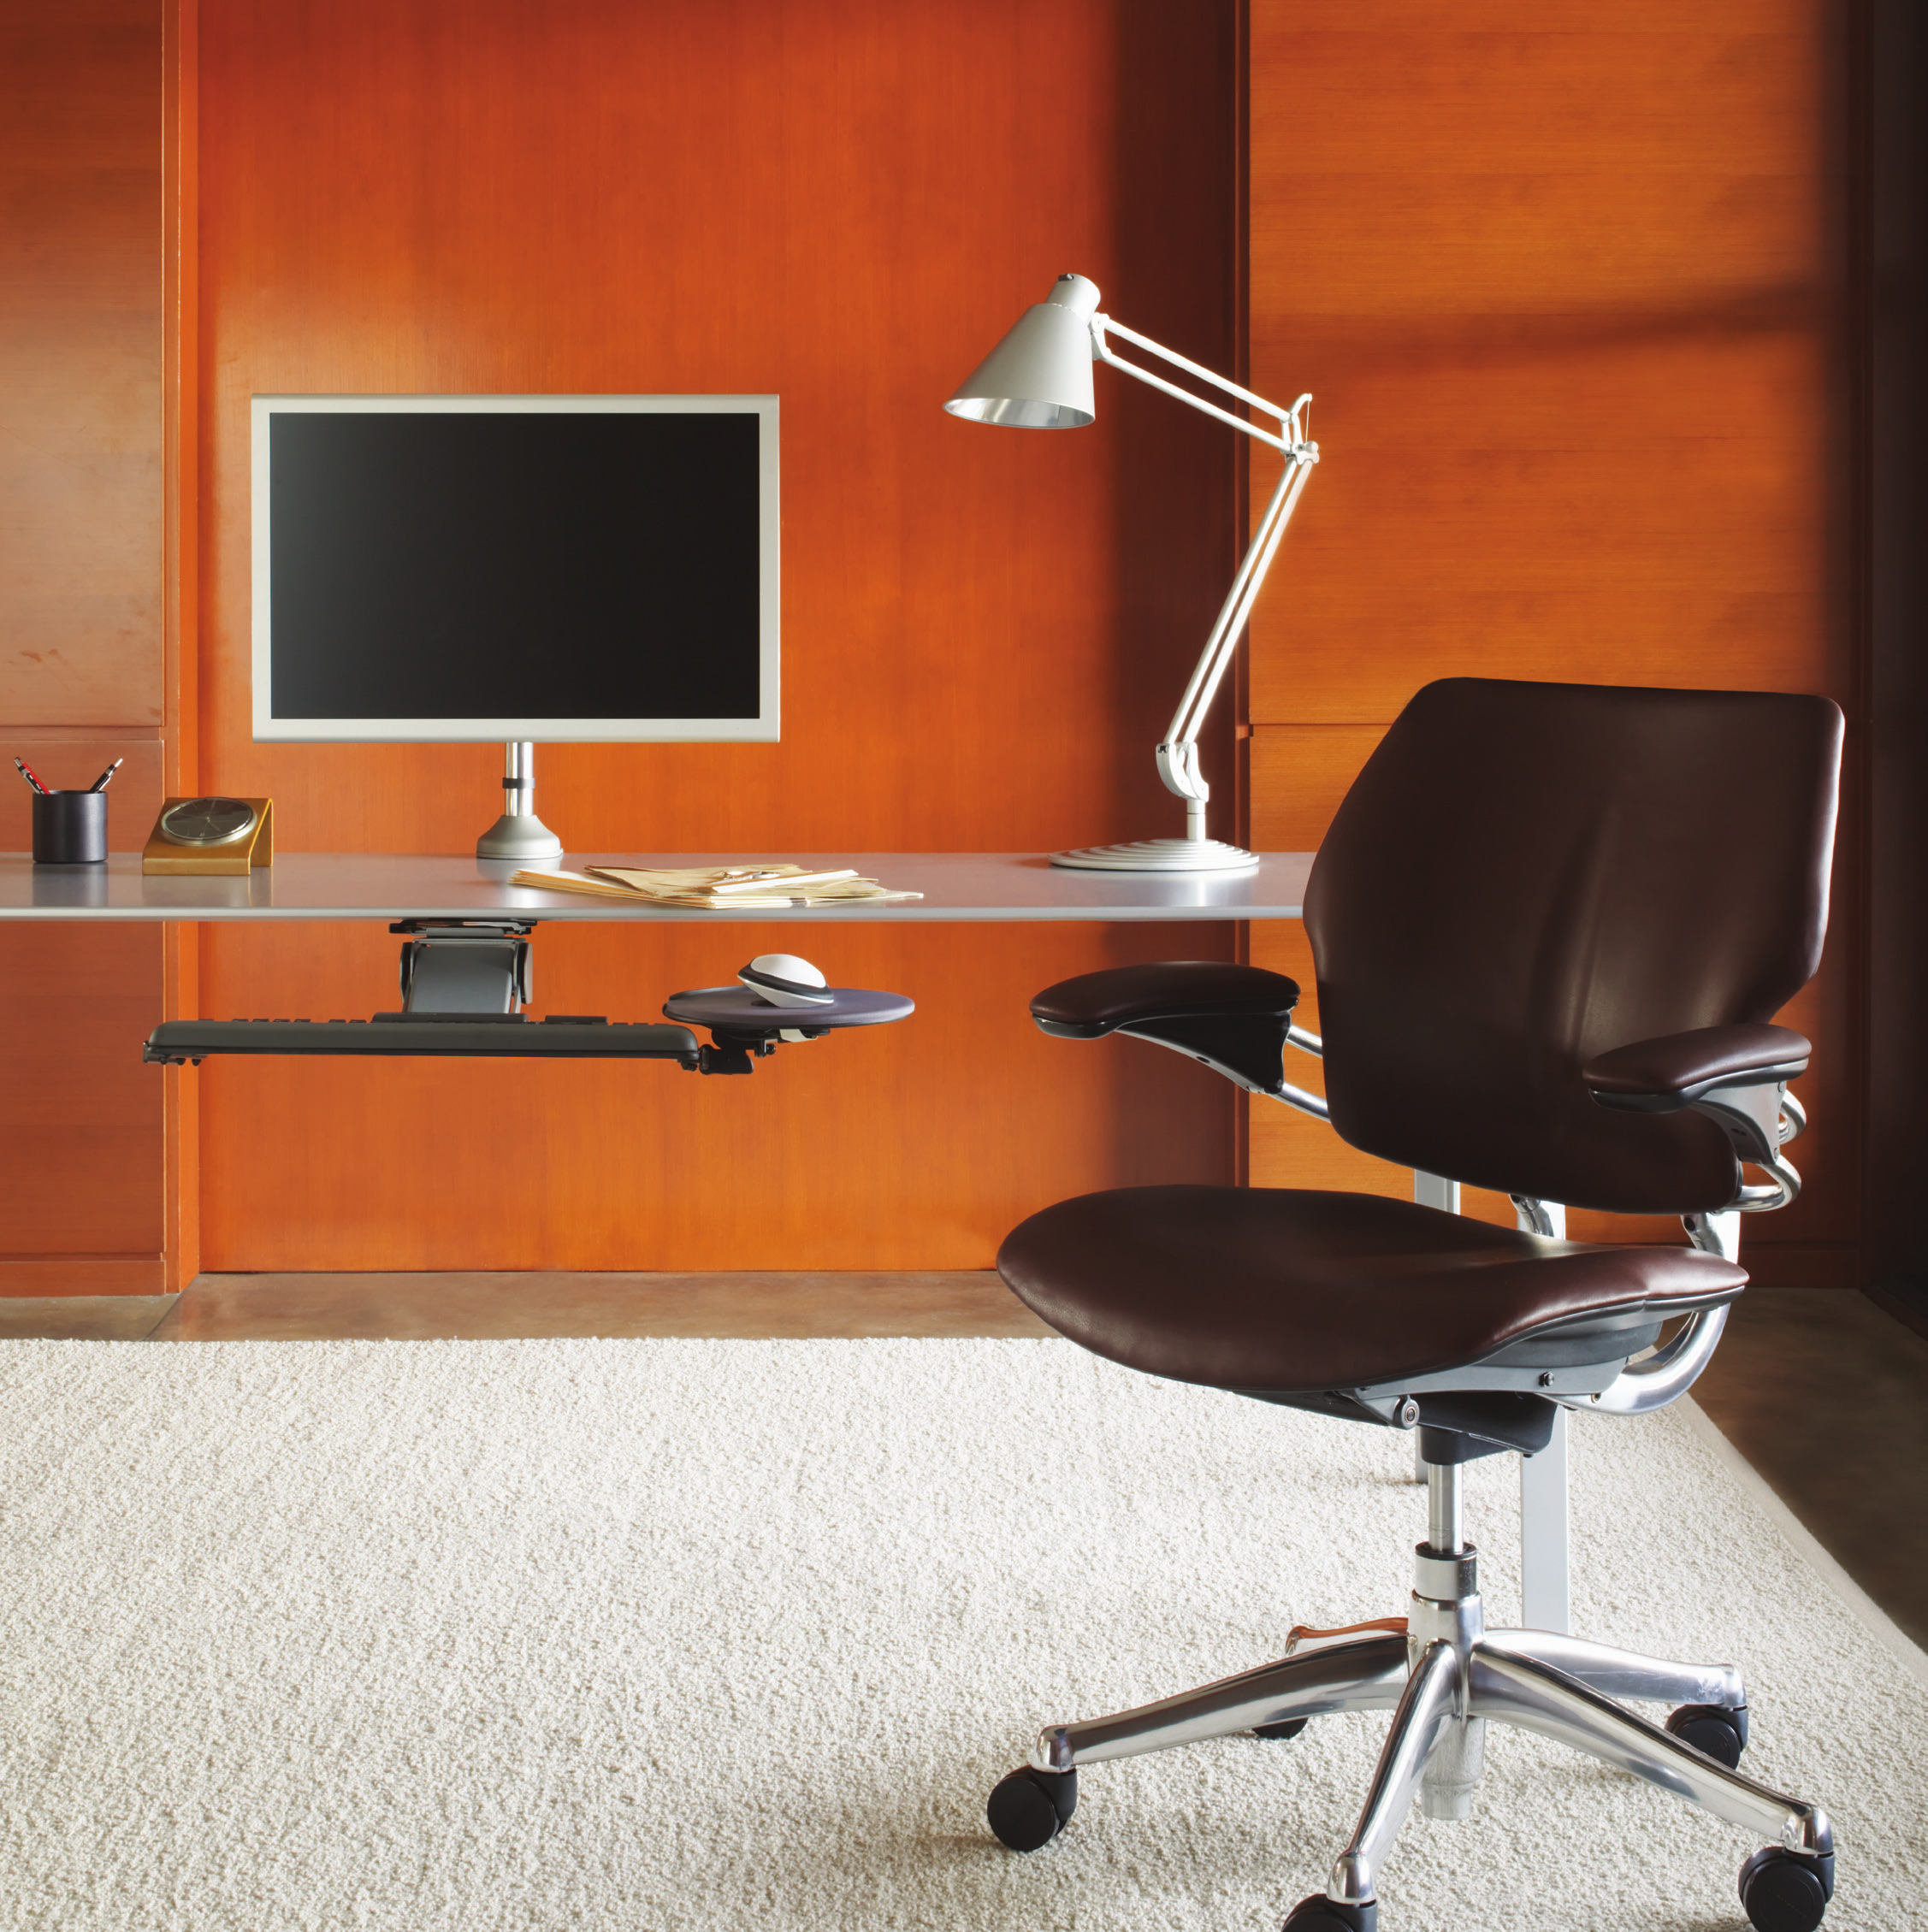 The Freedom chair was designed specifically to encourage frequent, spontaneous changes of posture.